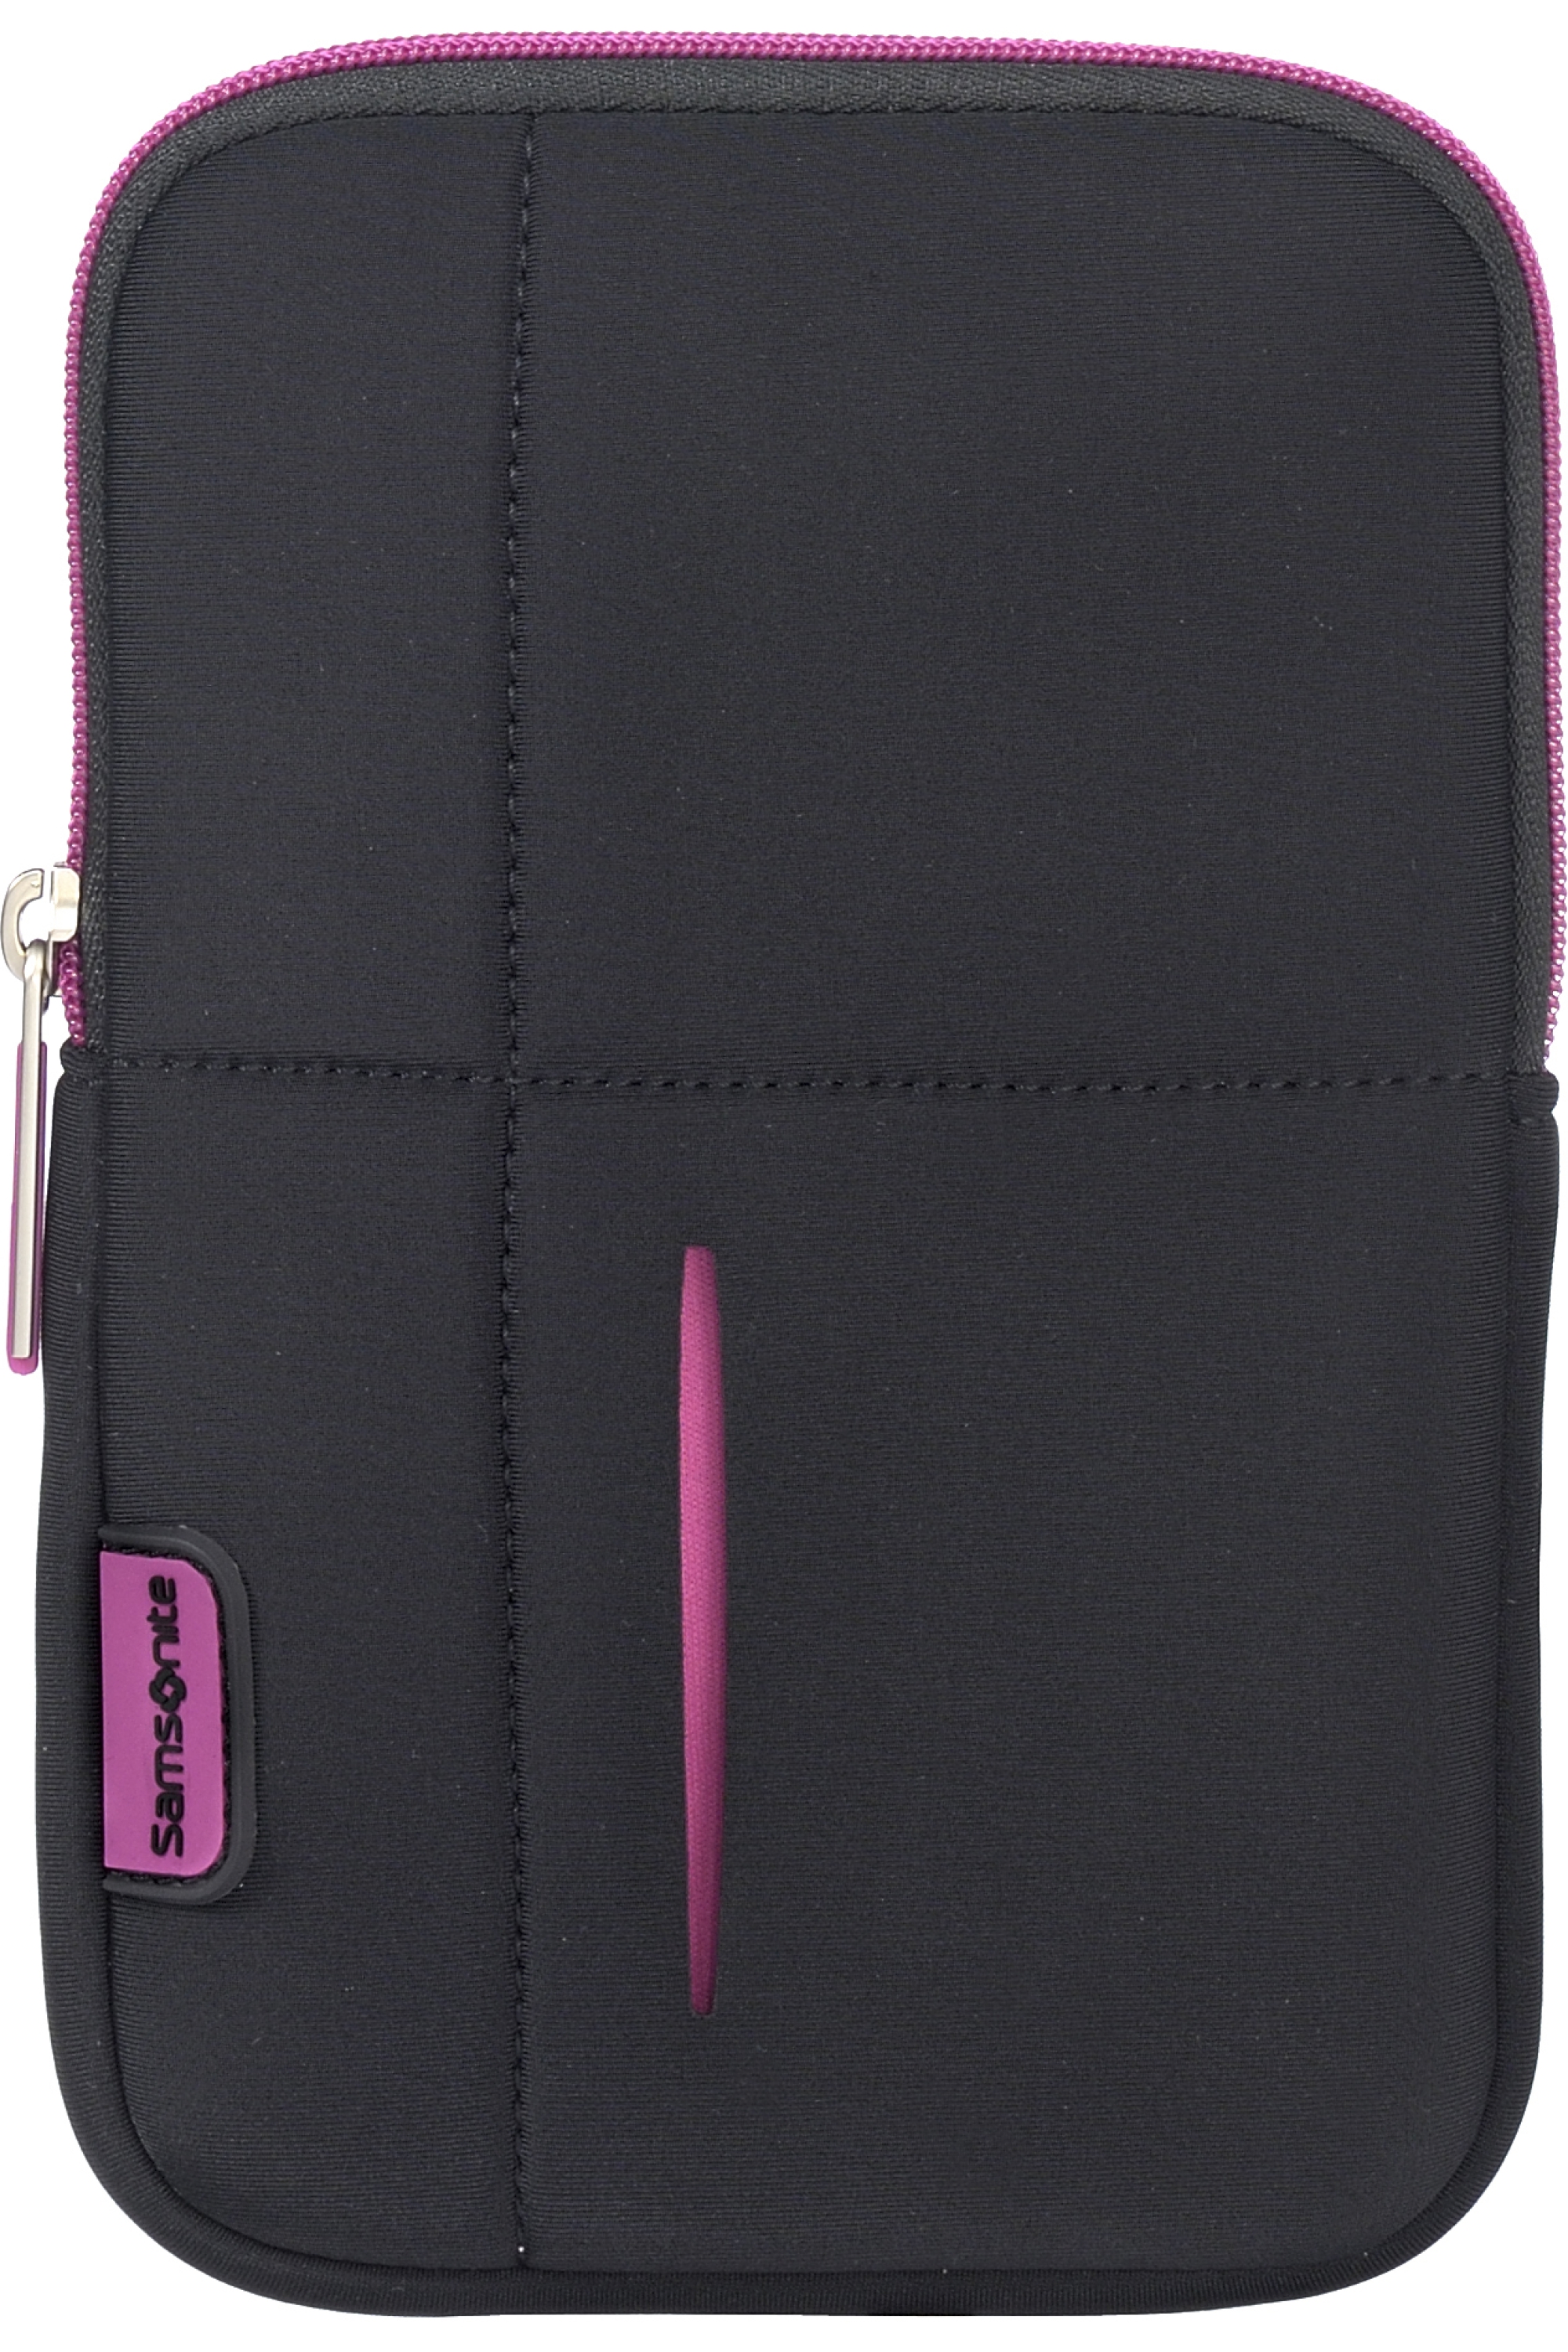 46739-1071-46739_1071_tablet_case_7_front-5d9f76f3-cf78-4afe-a442-a3a80076dabe-jpg